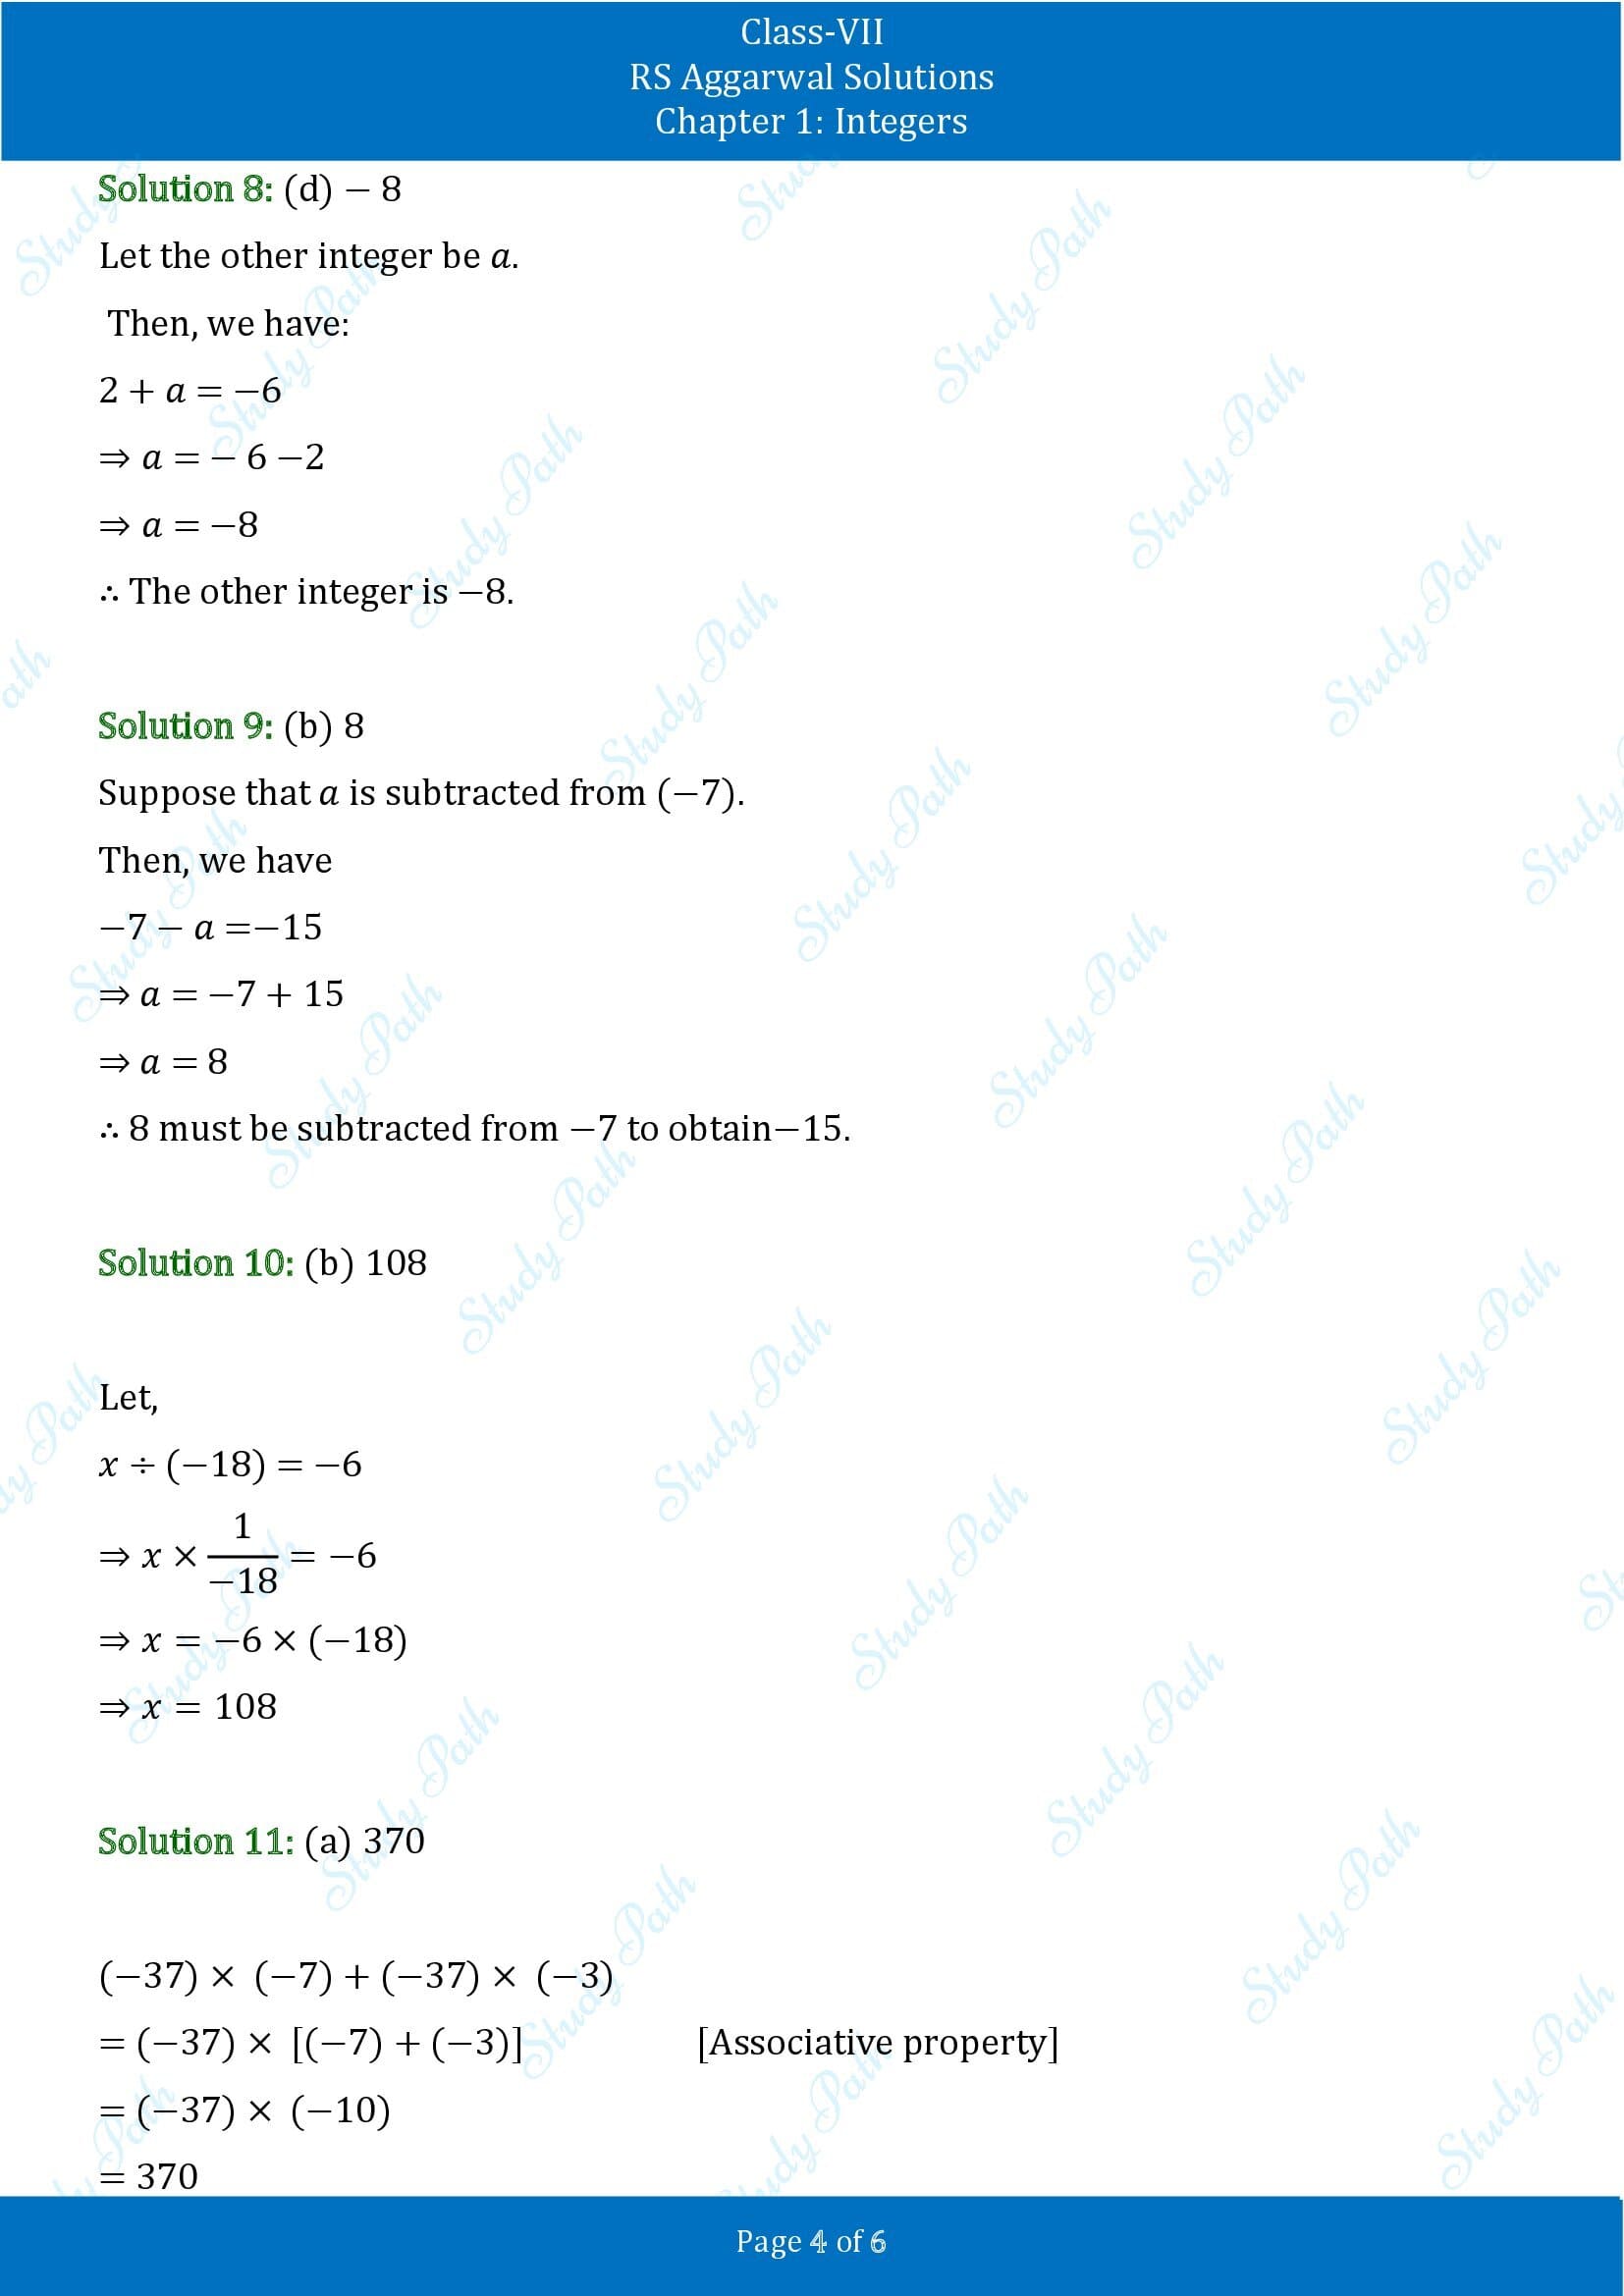 RS Aggarwal Solutions Class 7 Chapter 1 Integers Test Paper 00004